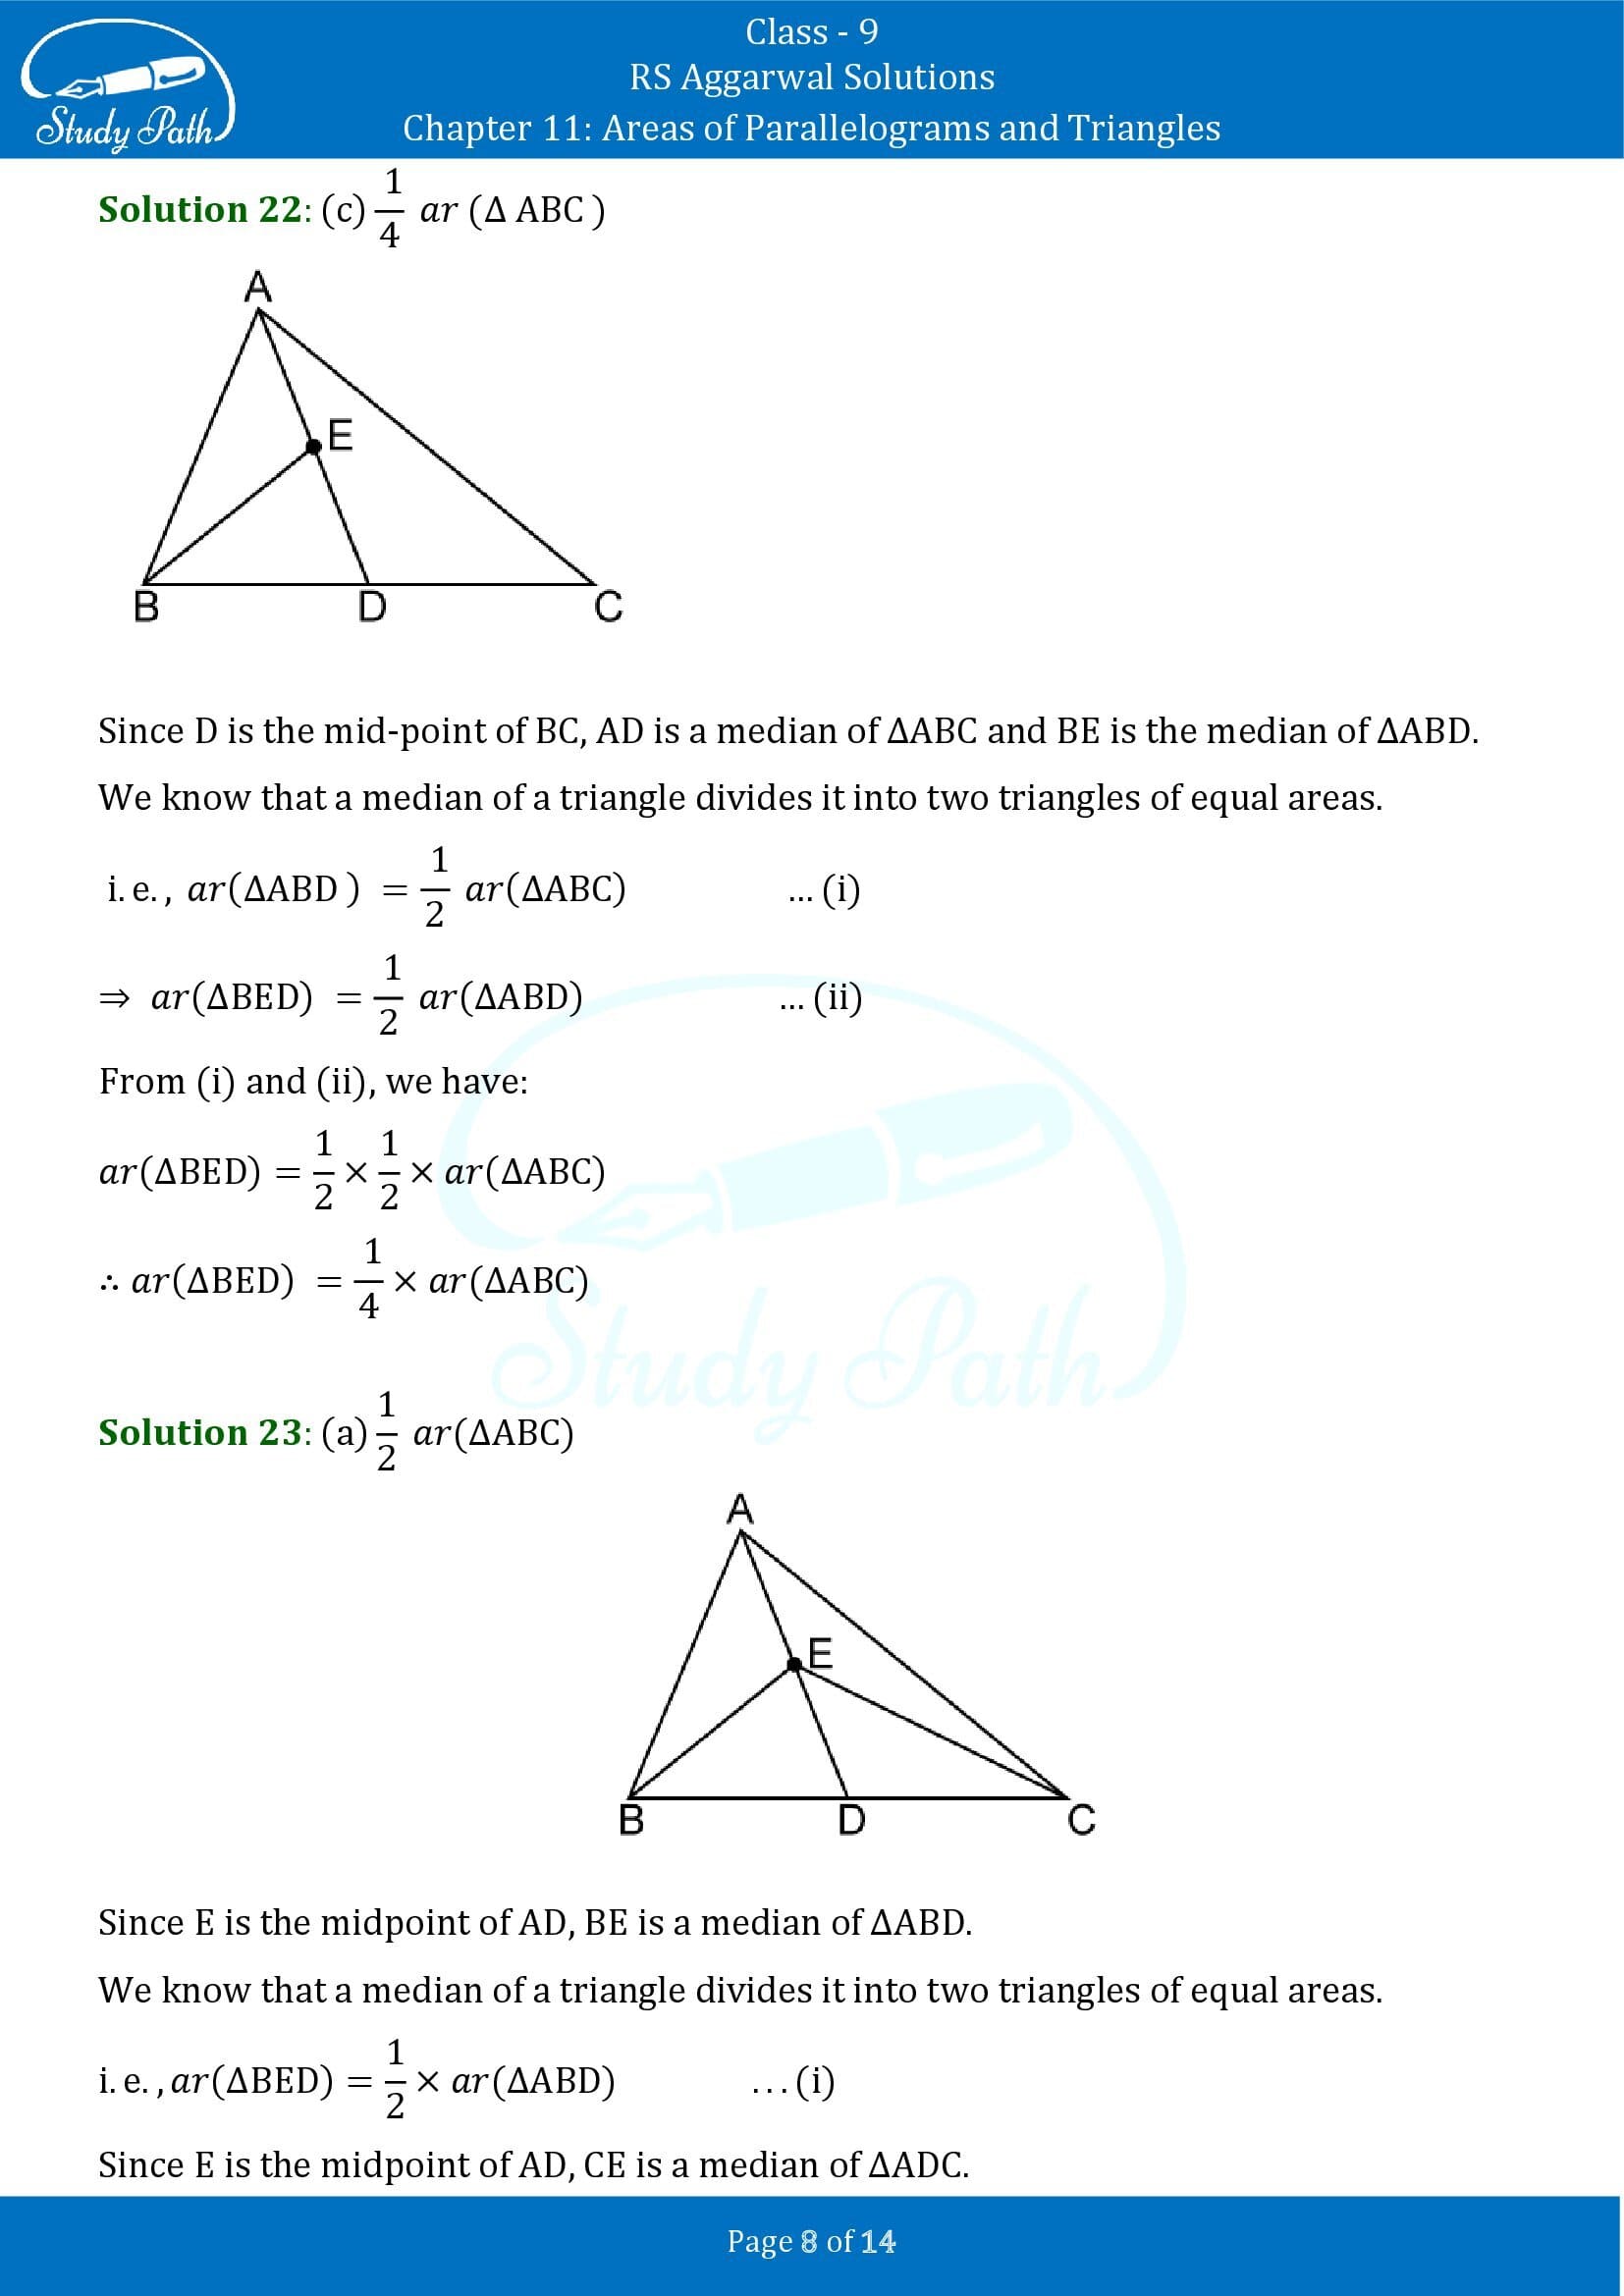 RS Aggarwal Solutions Class 9 Chapter 11 Areas of Parallelograms and Triangles Multiple Choice Questions MCQs 00008